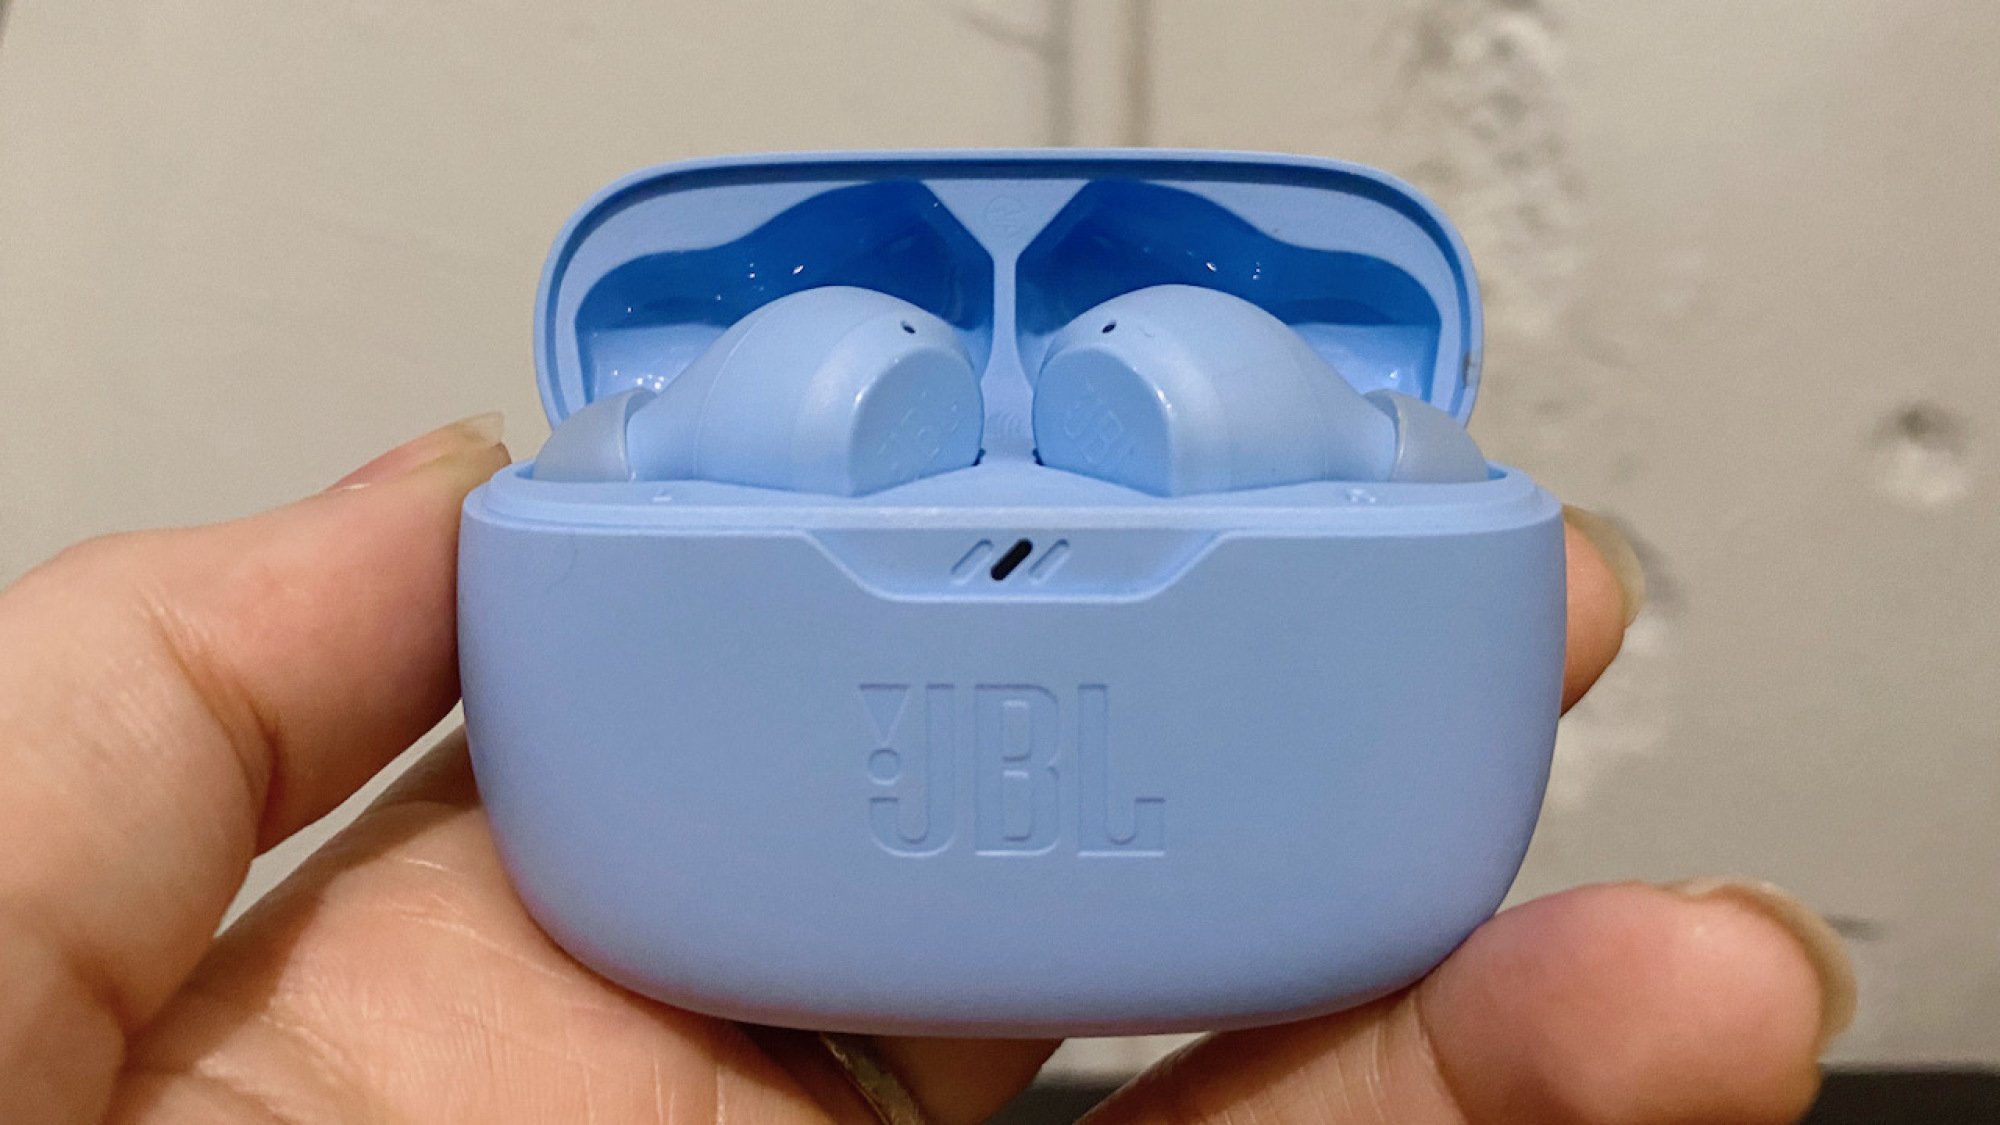 close-up of jbl vibe beam earbuds charging case in hand